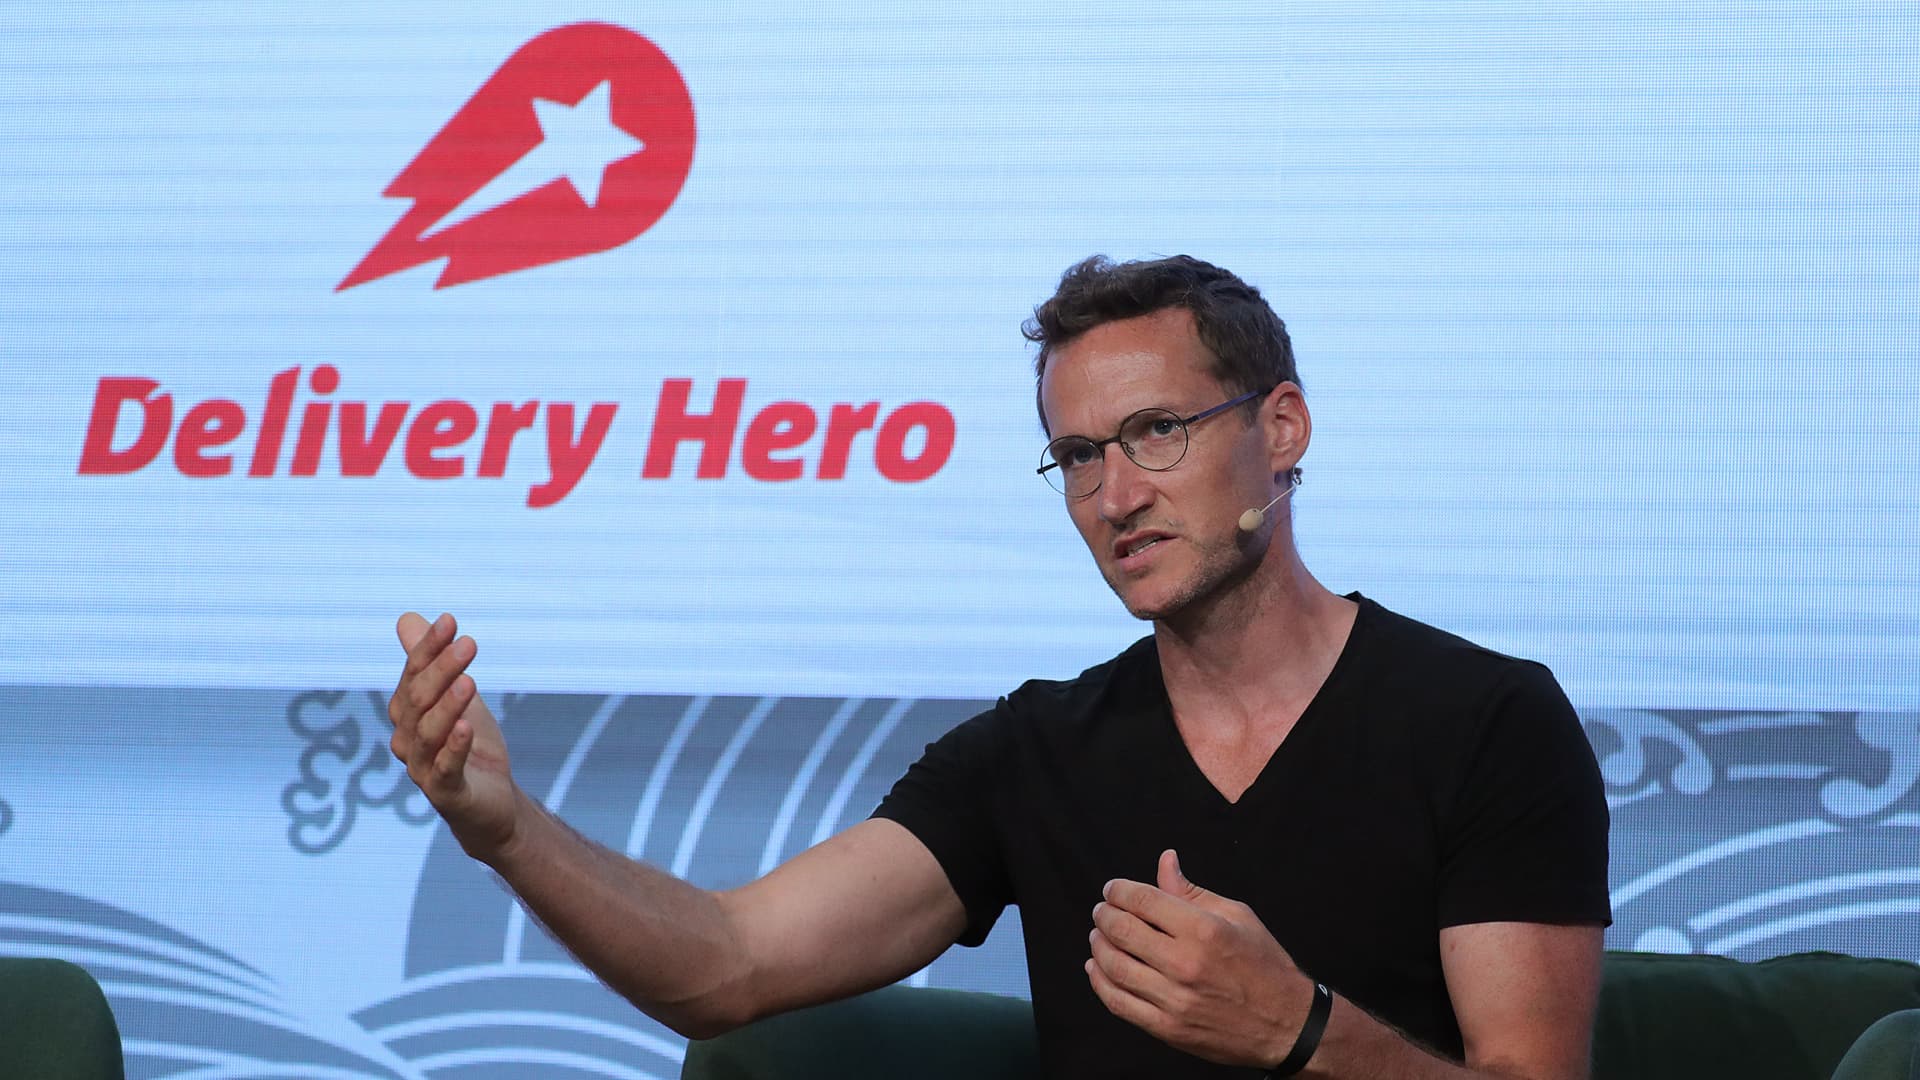 Delivery Hero says it hit 2023 sales growth targets in early results after 26% stock plunge